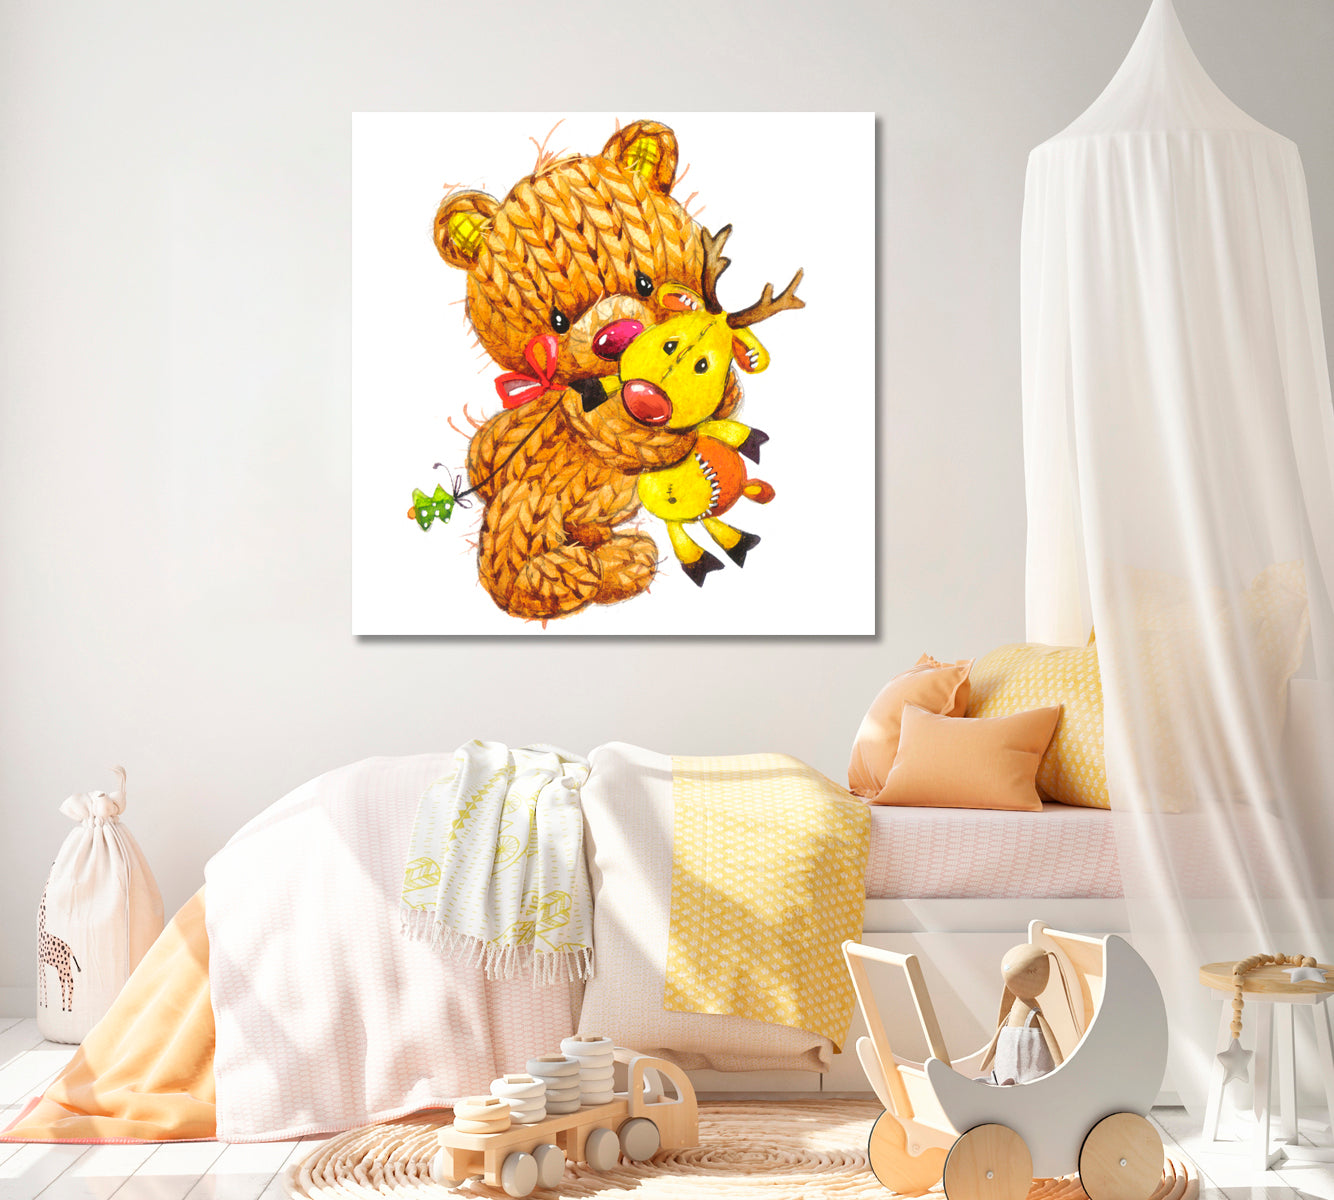 Knitted Teddy Bear Canvas Print ArtLexy 1 Panel 12"x12" inches 